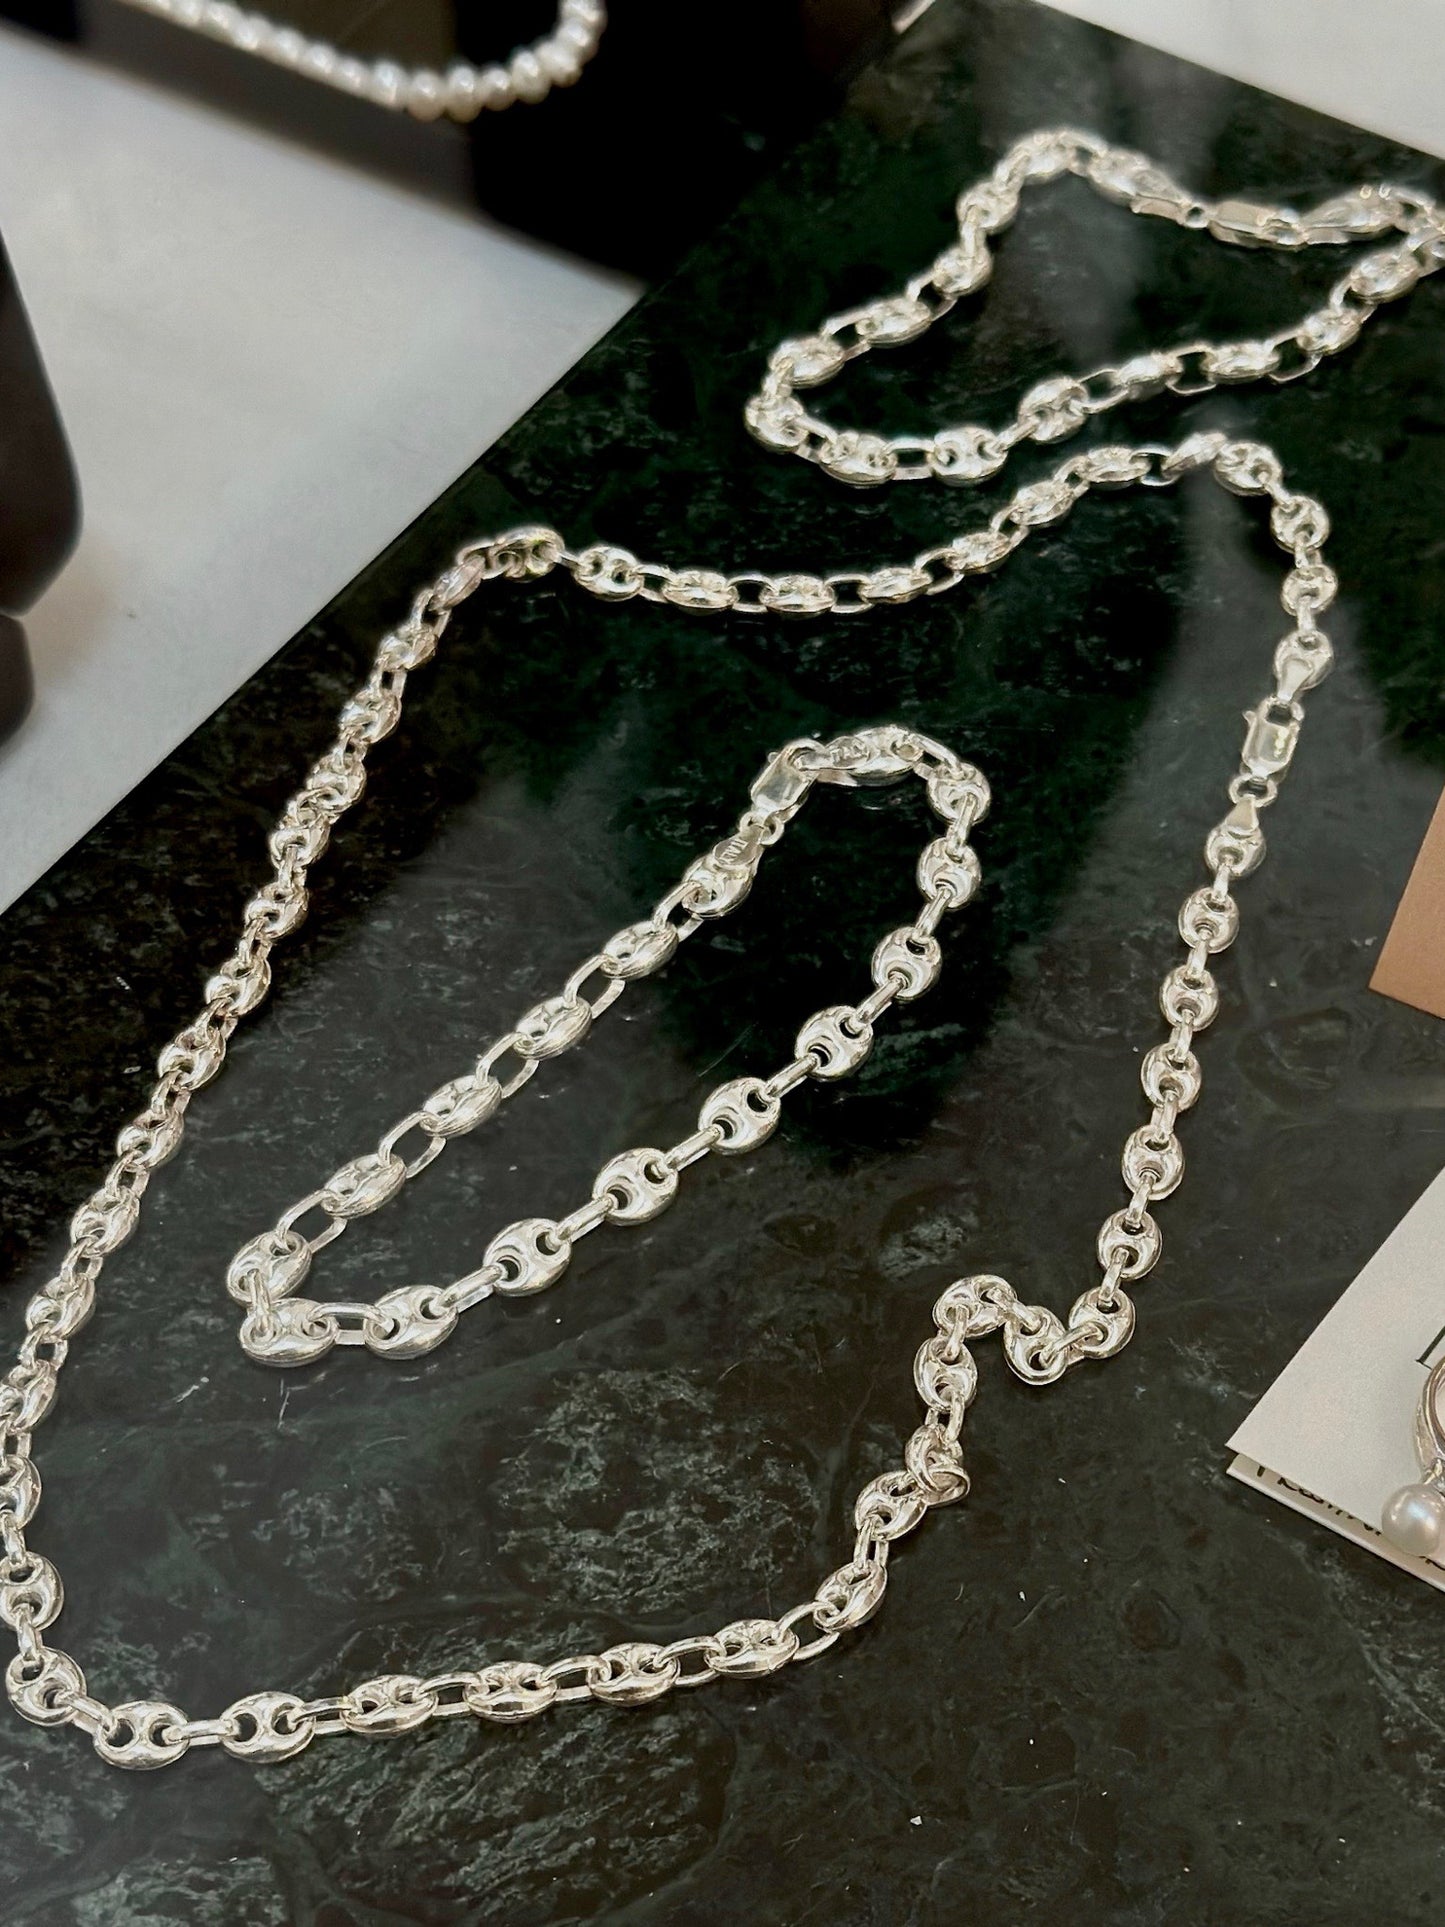 jewellery displayed beautiful for a jewellery store, featuring a sterling silver Gucci necklace and Gucci link bracelets.